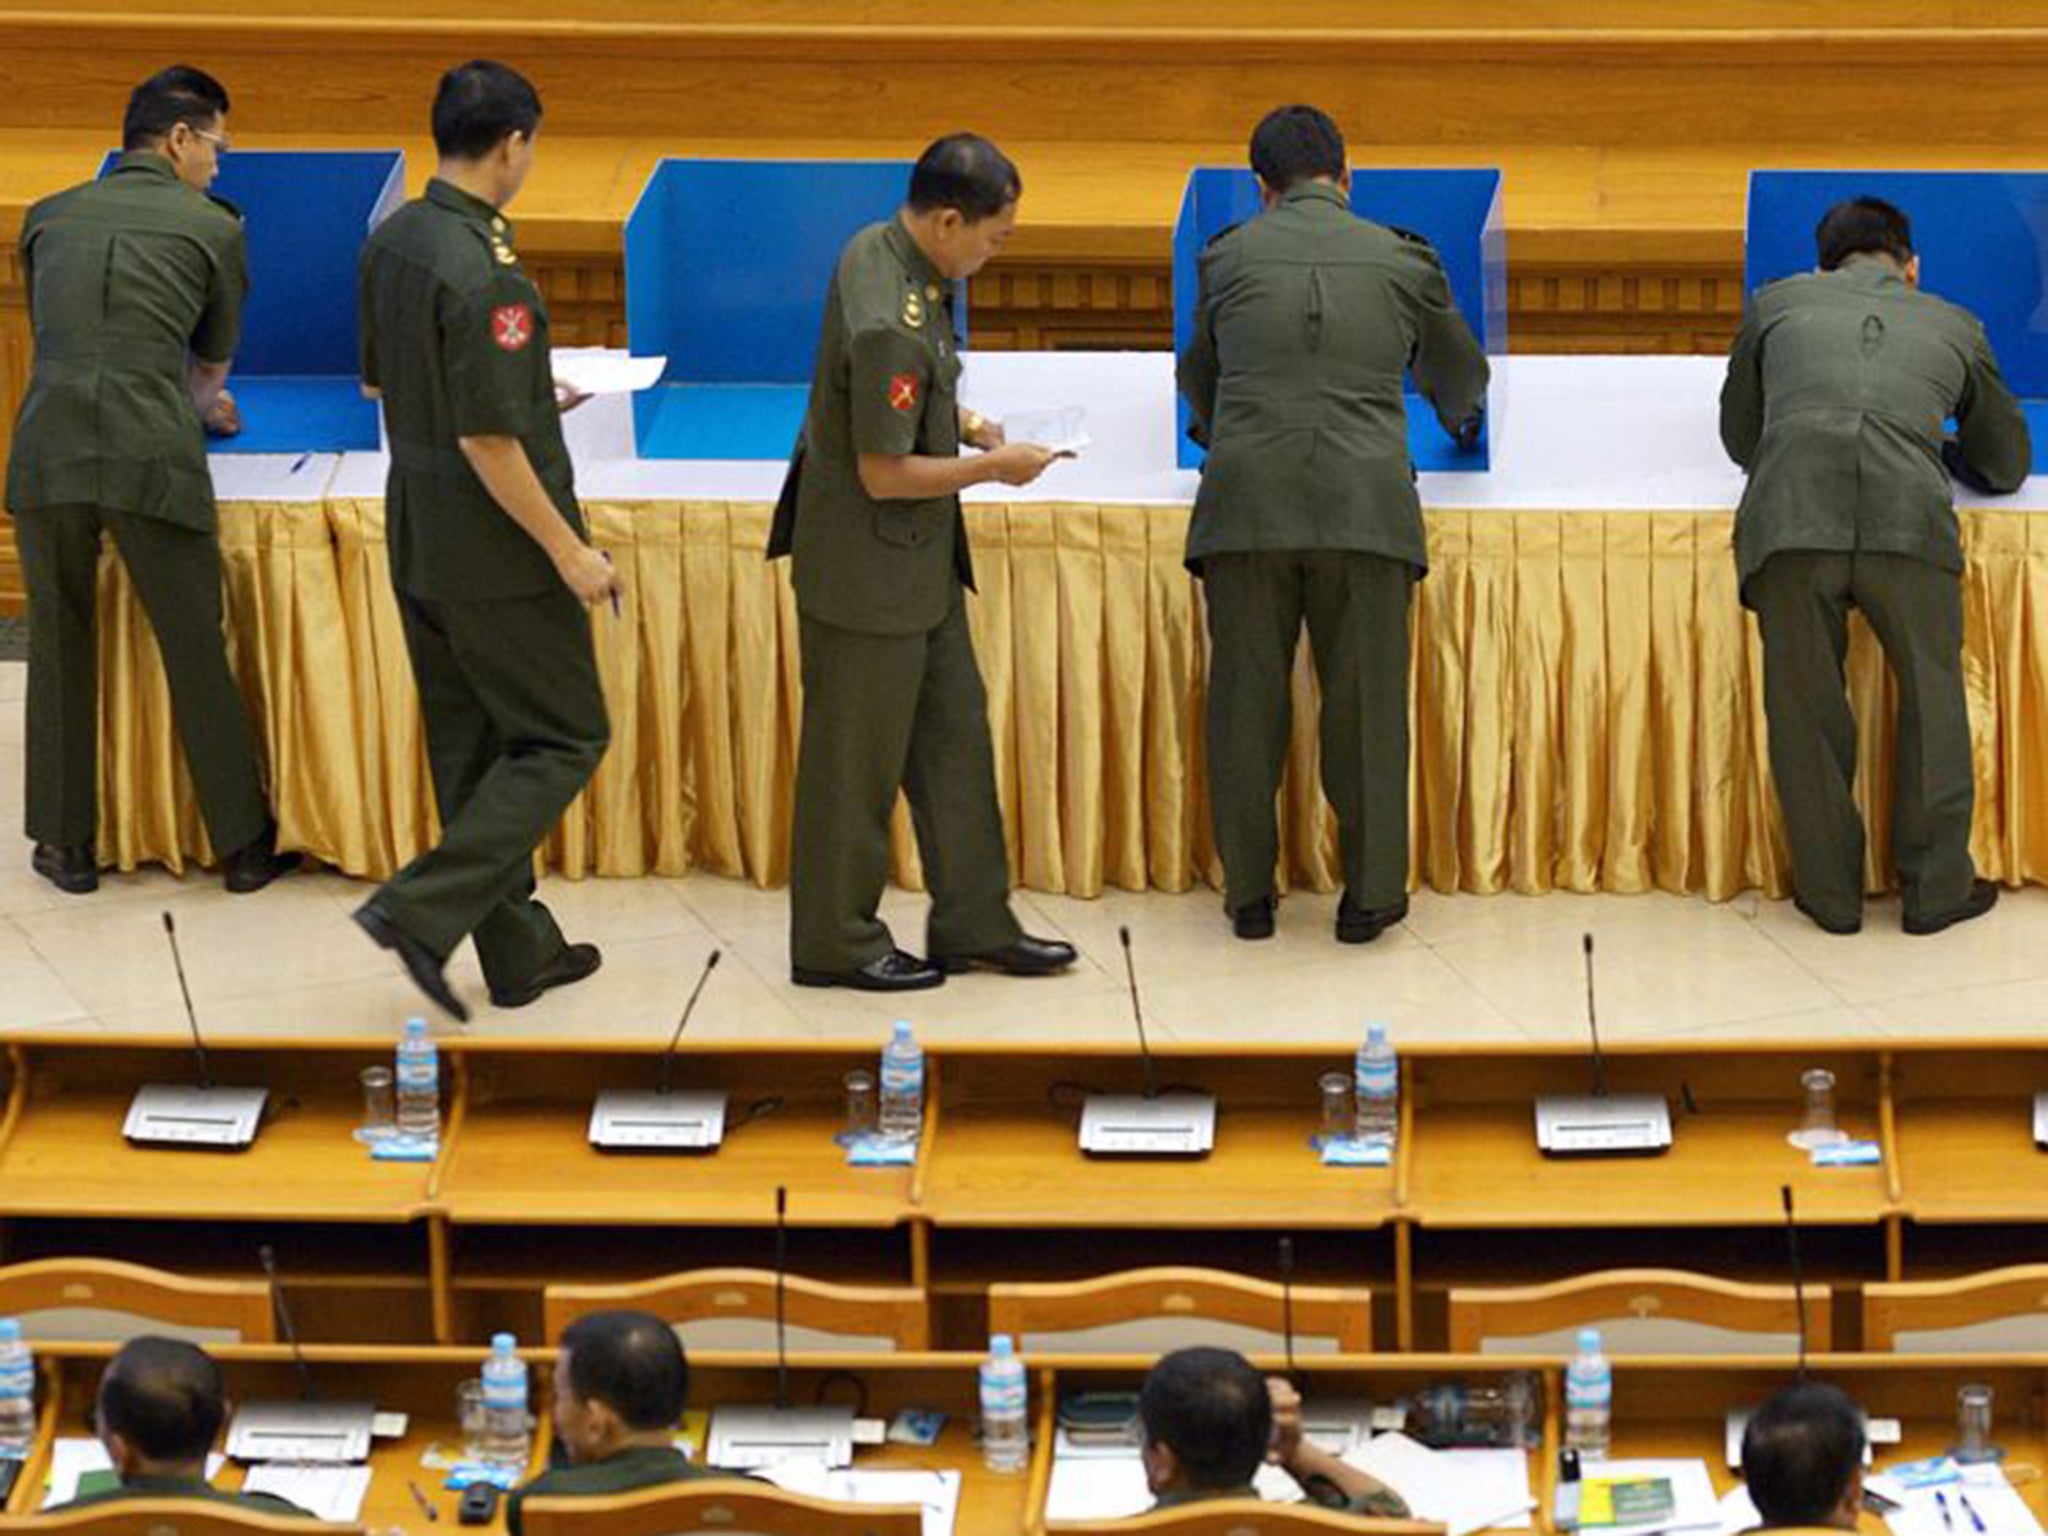 Aung San Suu Kyi's hopes of amending the constitution were dealt a decisive blow by the voting of Parliament's army members